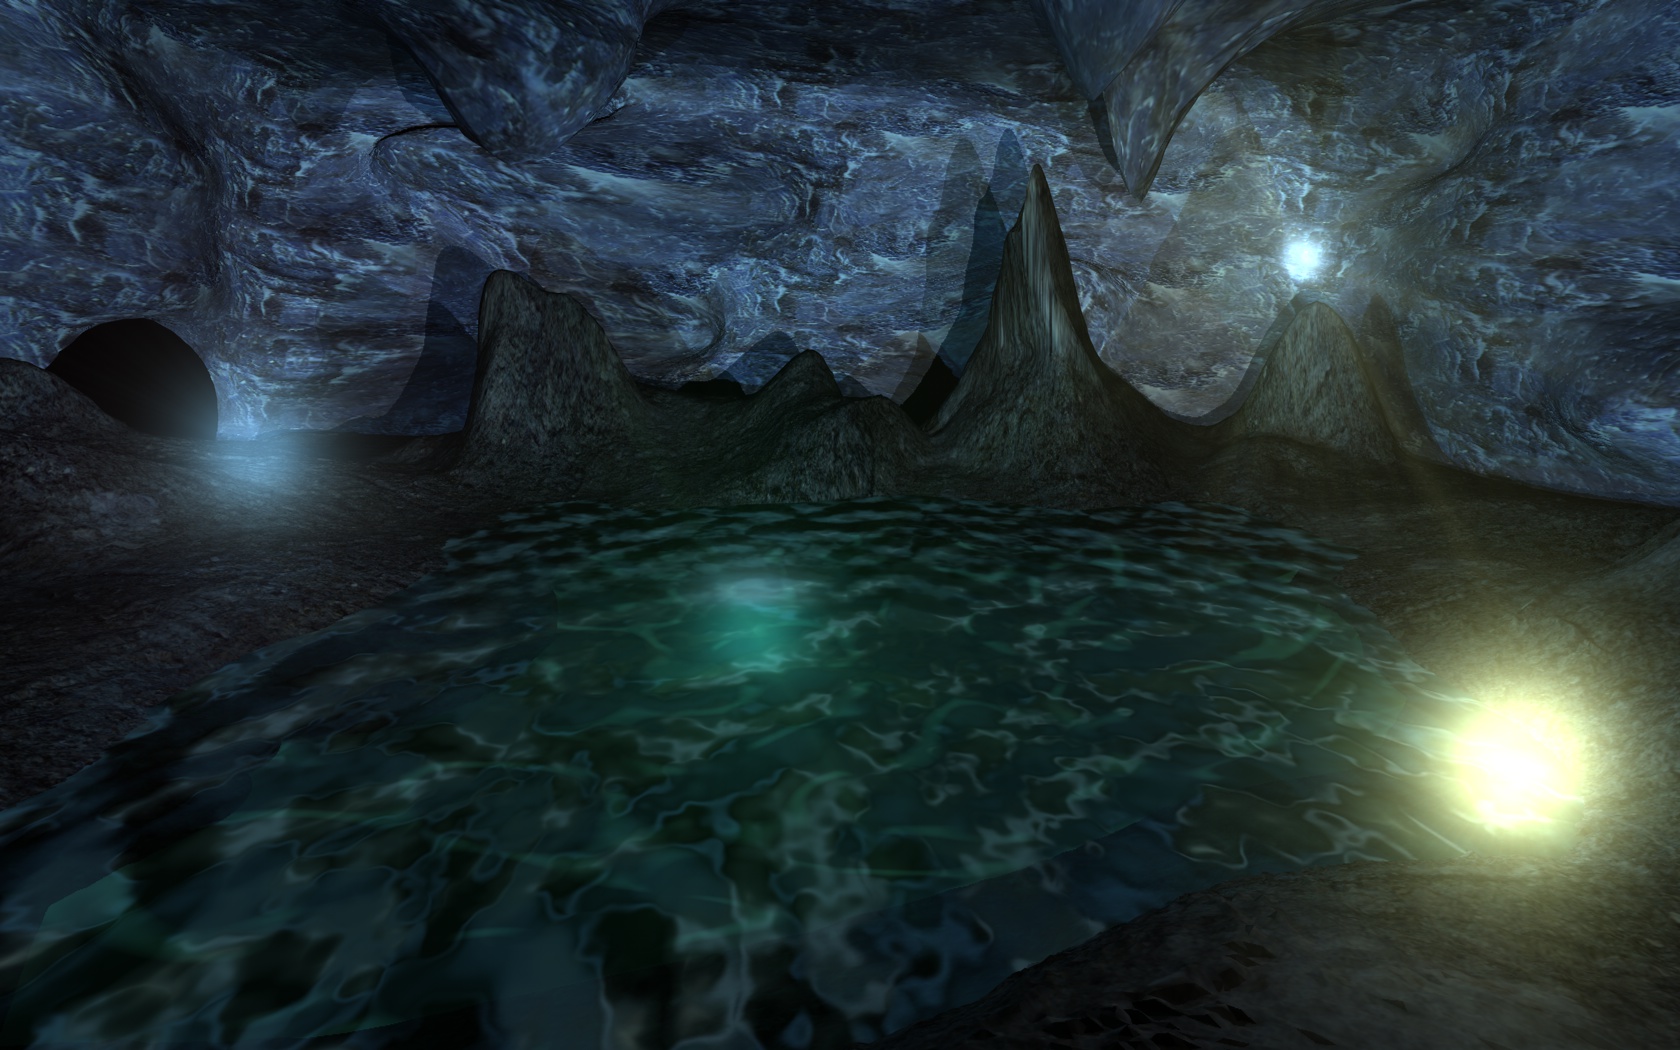 Cavern Chamber in 3D